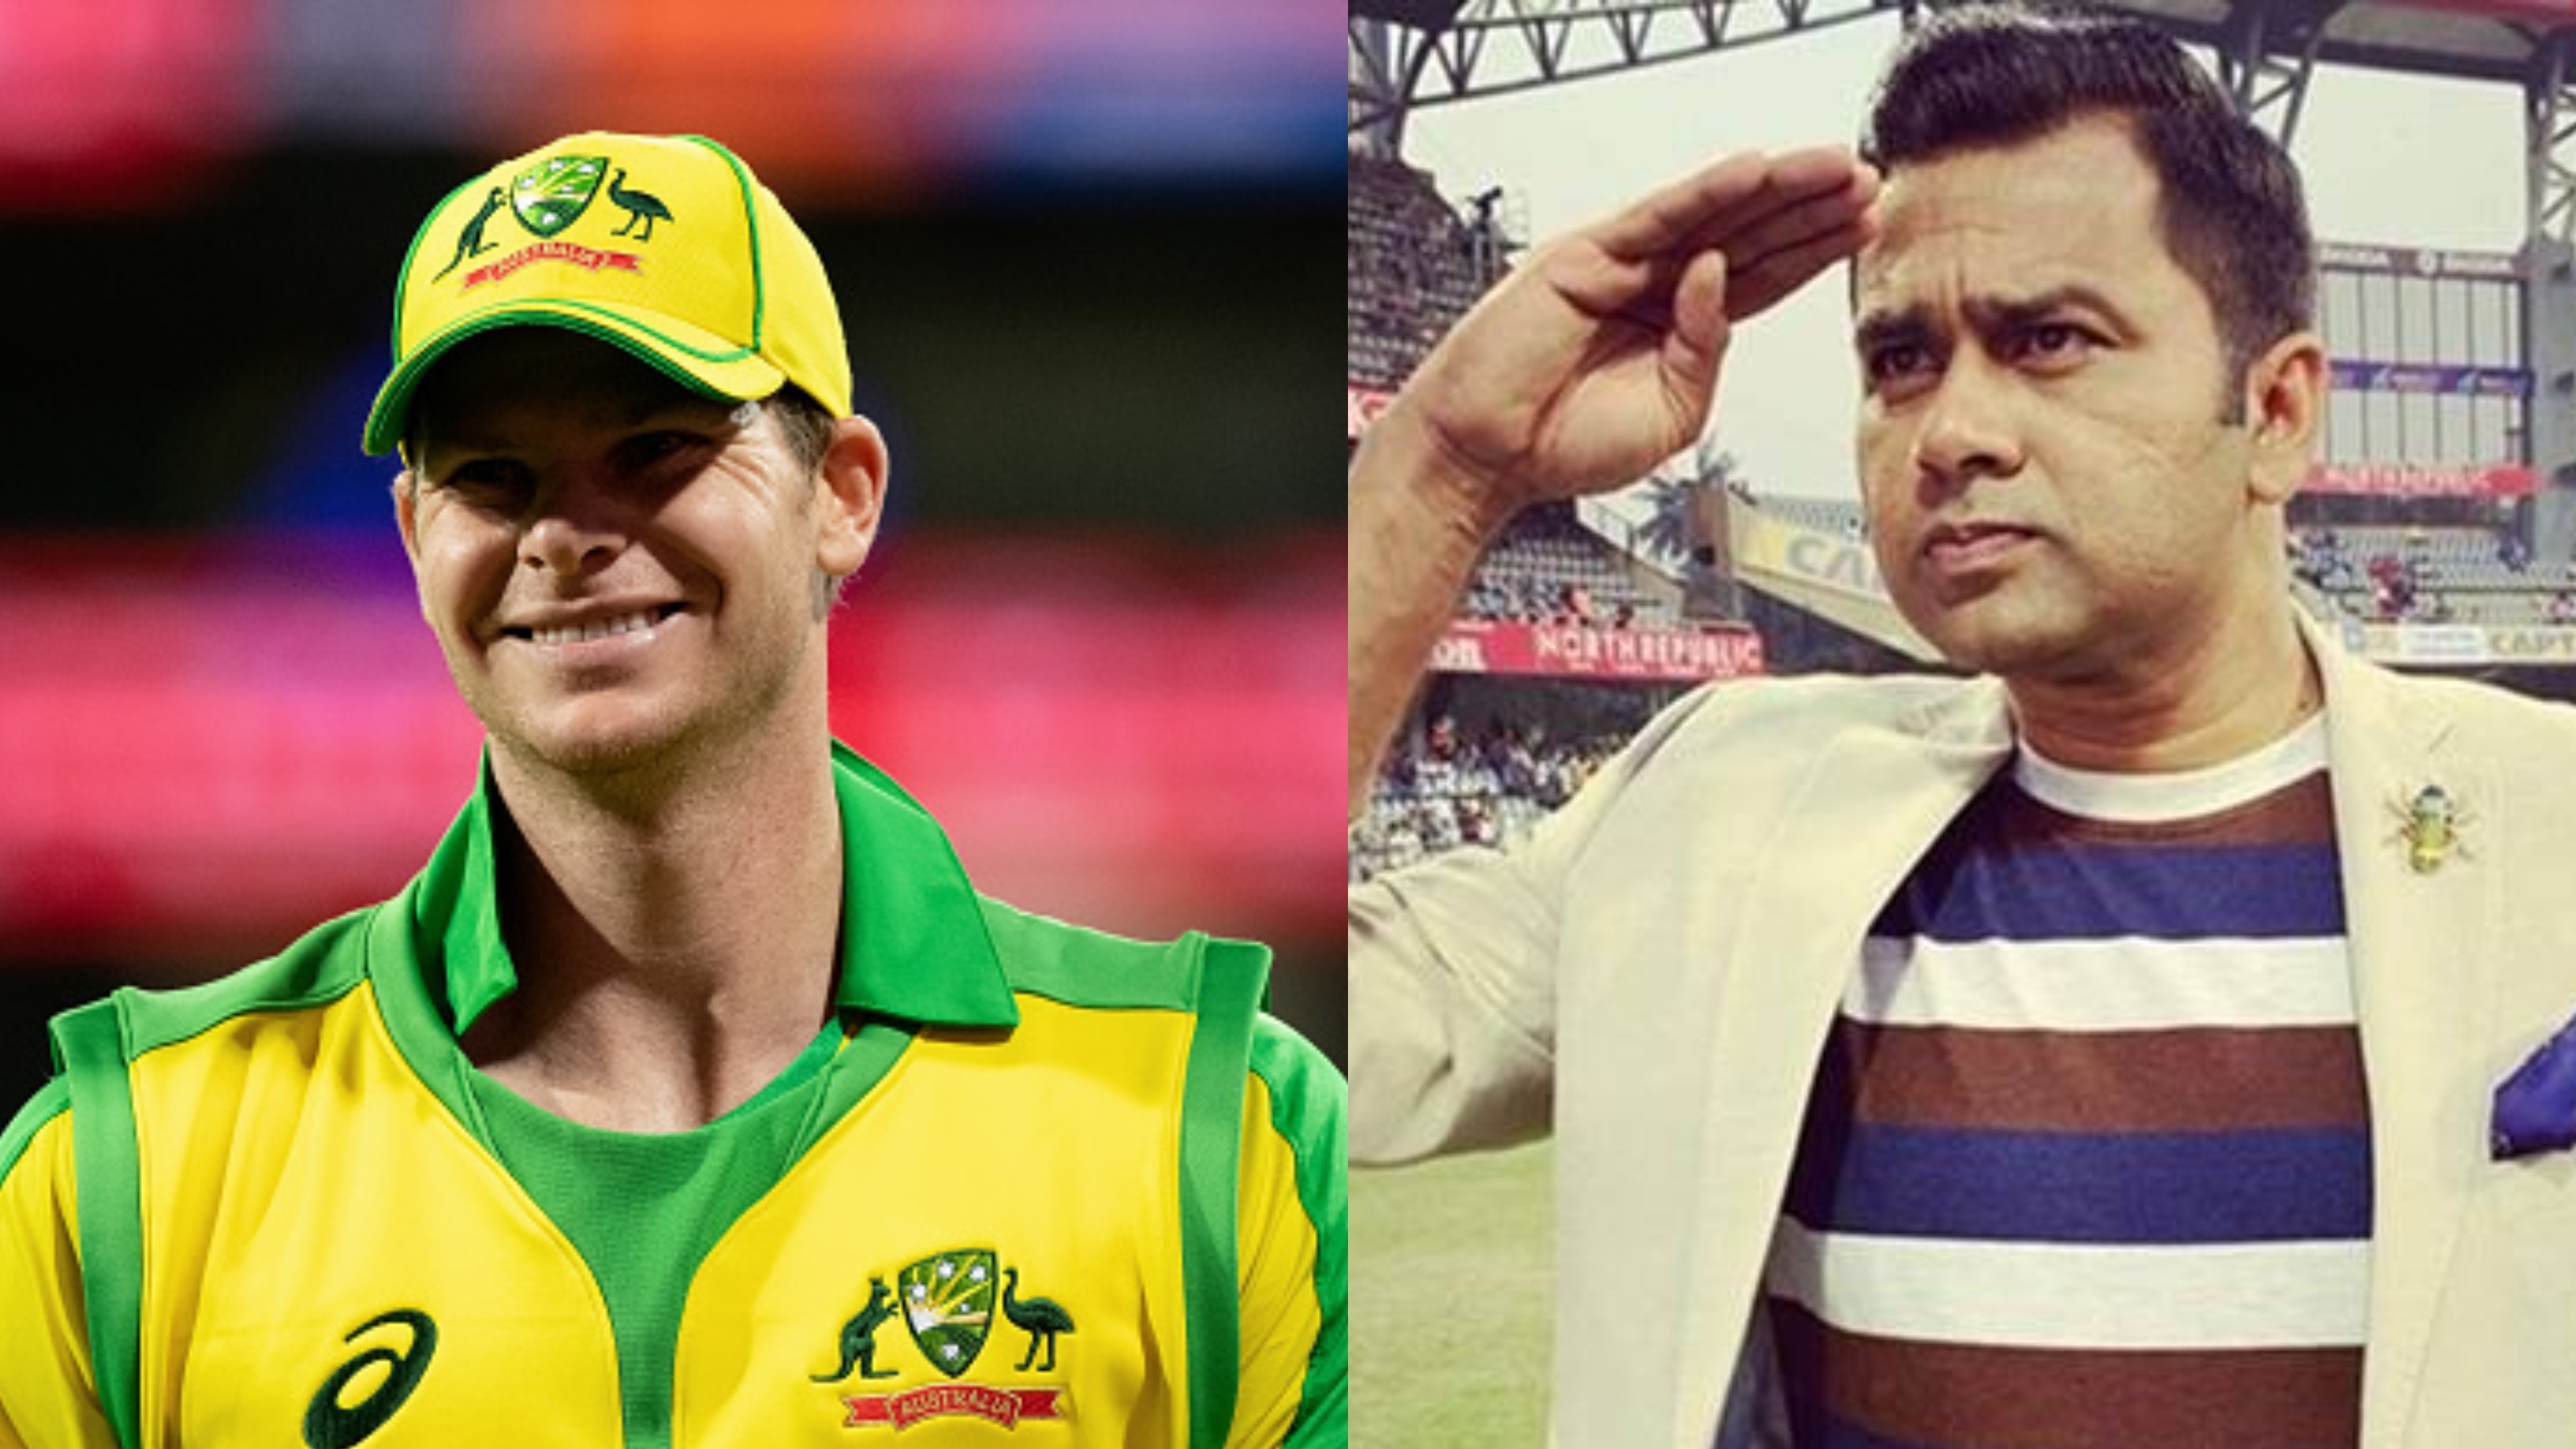 AUS v IND 2020-21: Aakash Chopra suggests Indian citizenship for Steve Smith after record hundred in 1st ODI